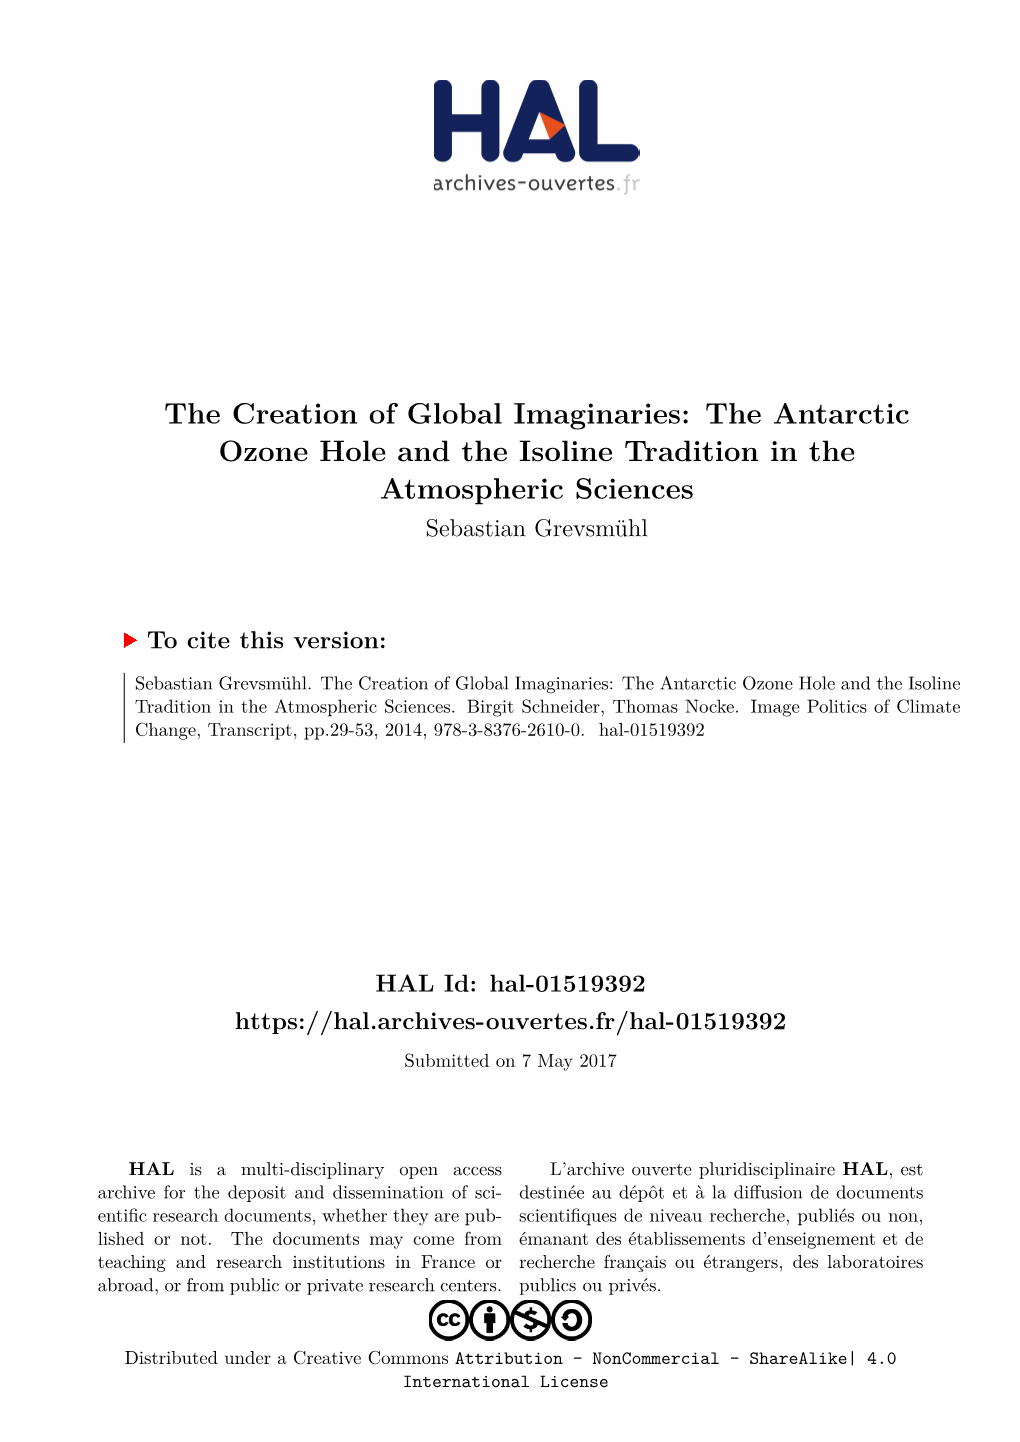 The Creation of Global Imaginaries: the Antarctic Ozone Hole and the Isoline Tradition in the Atmospheric Sciences Sebastian Grevsmühl